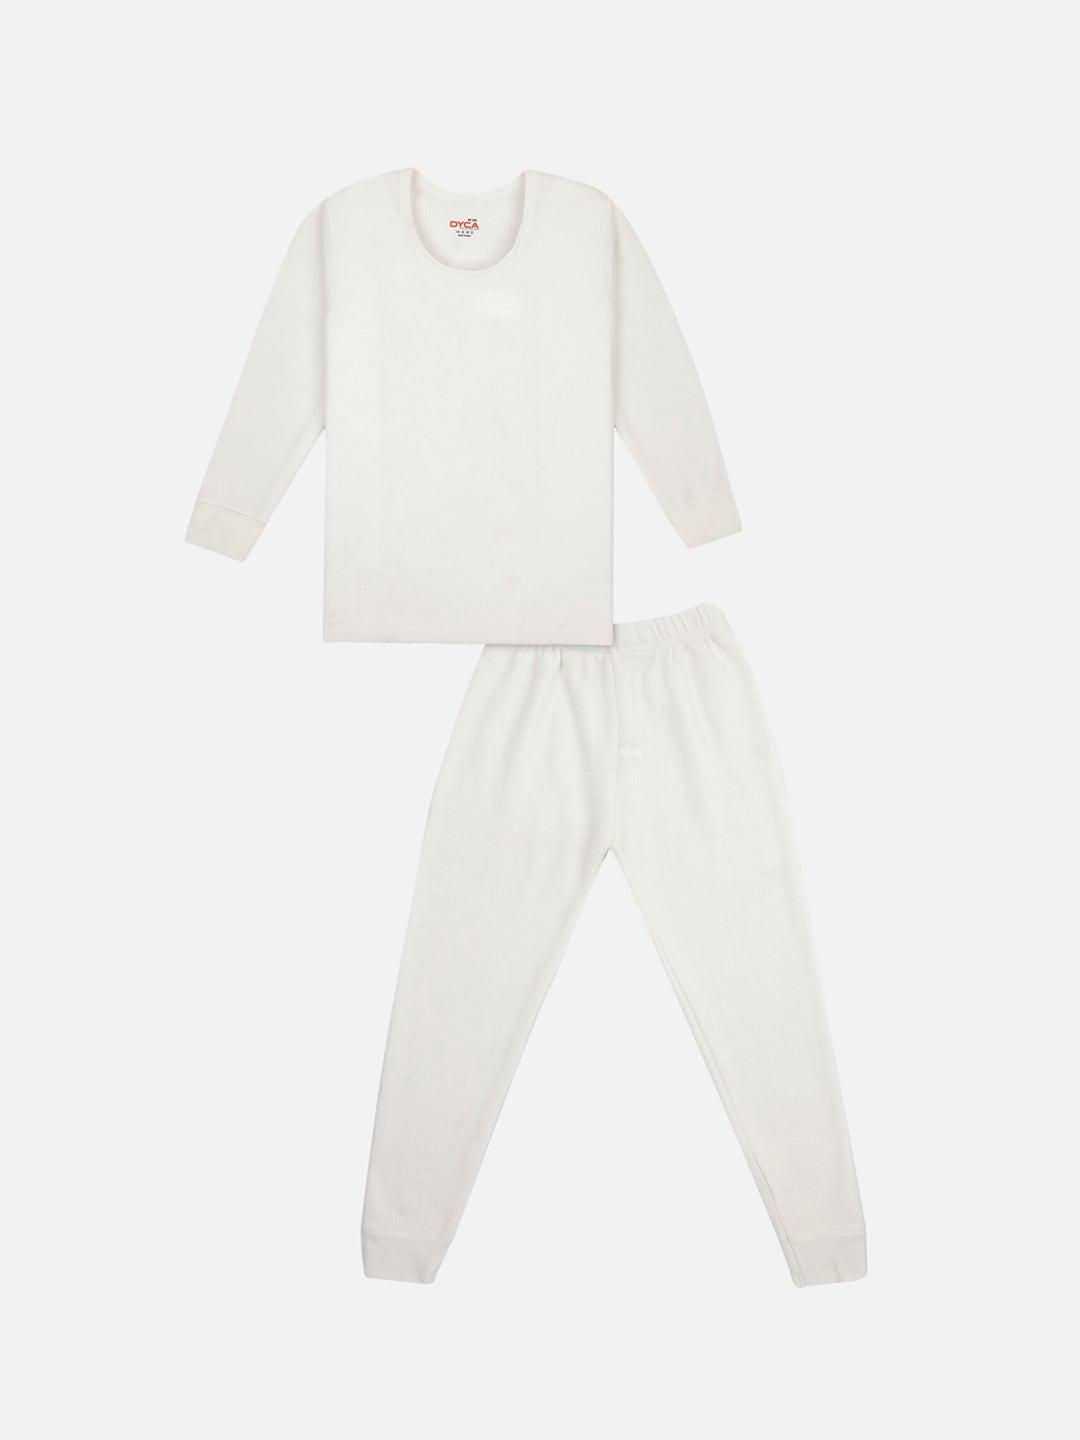 dyca-kids-off-white-solid-thermal-set